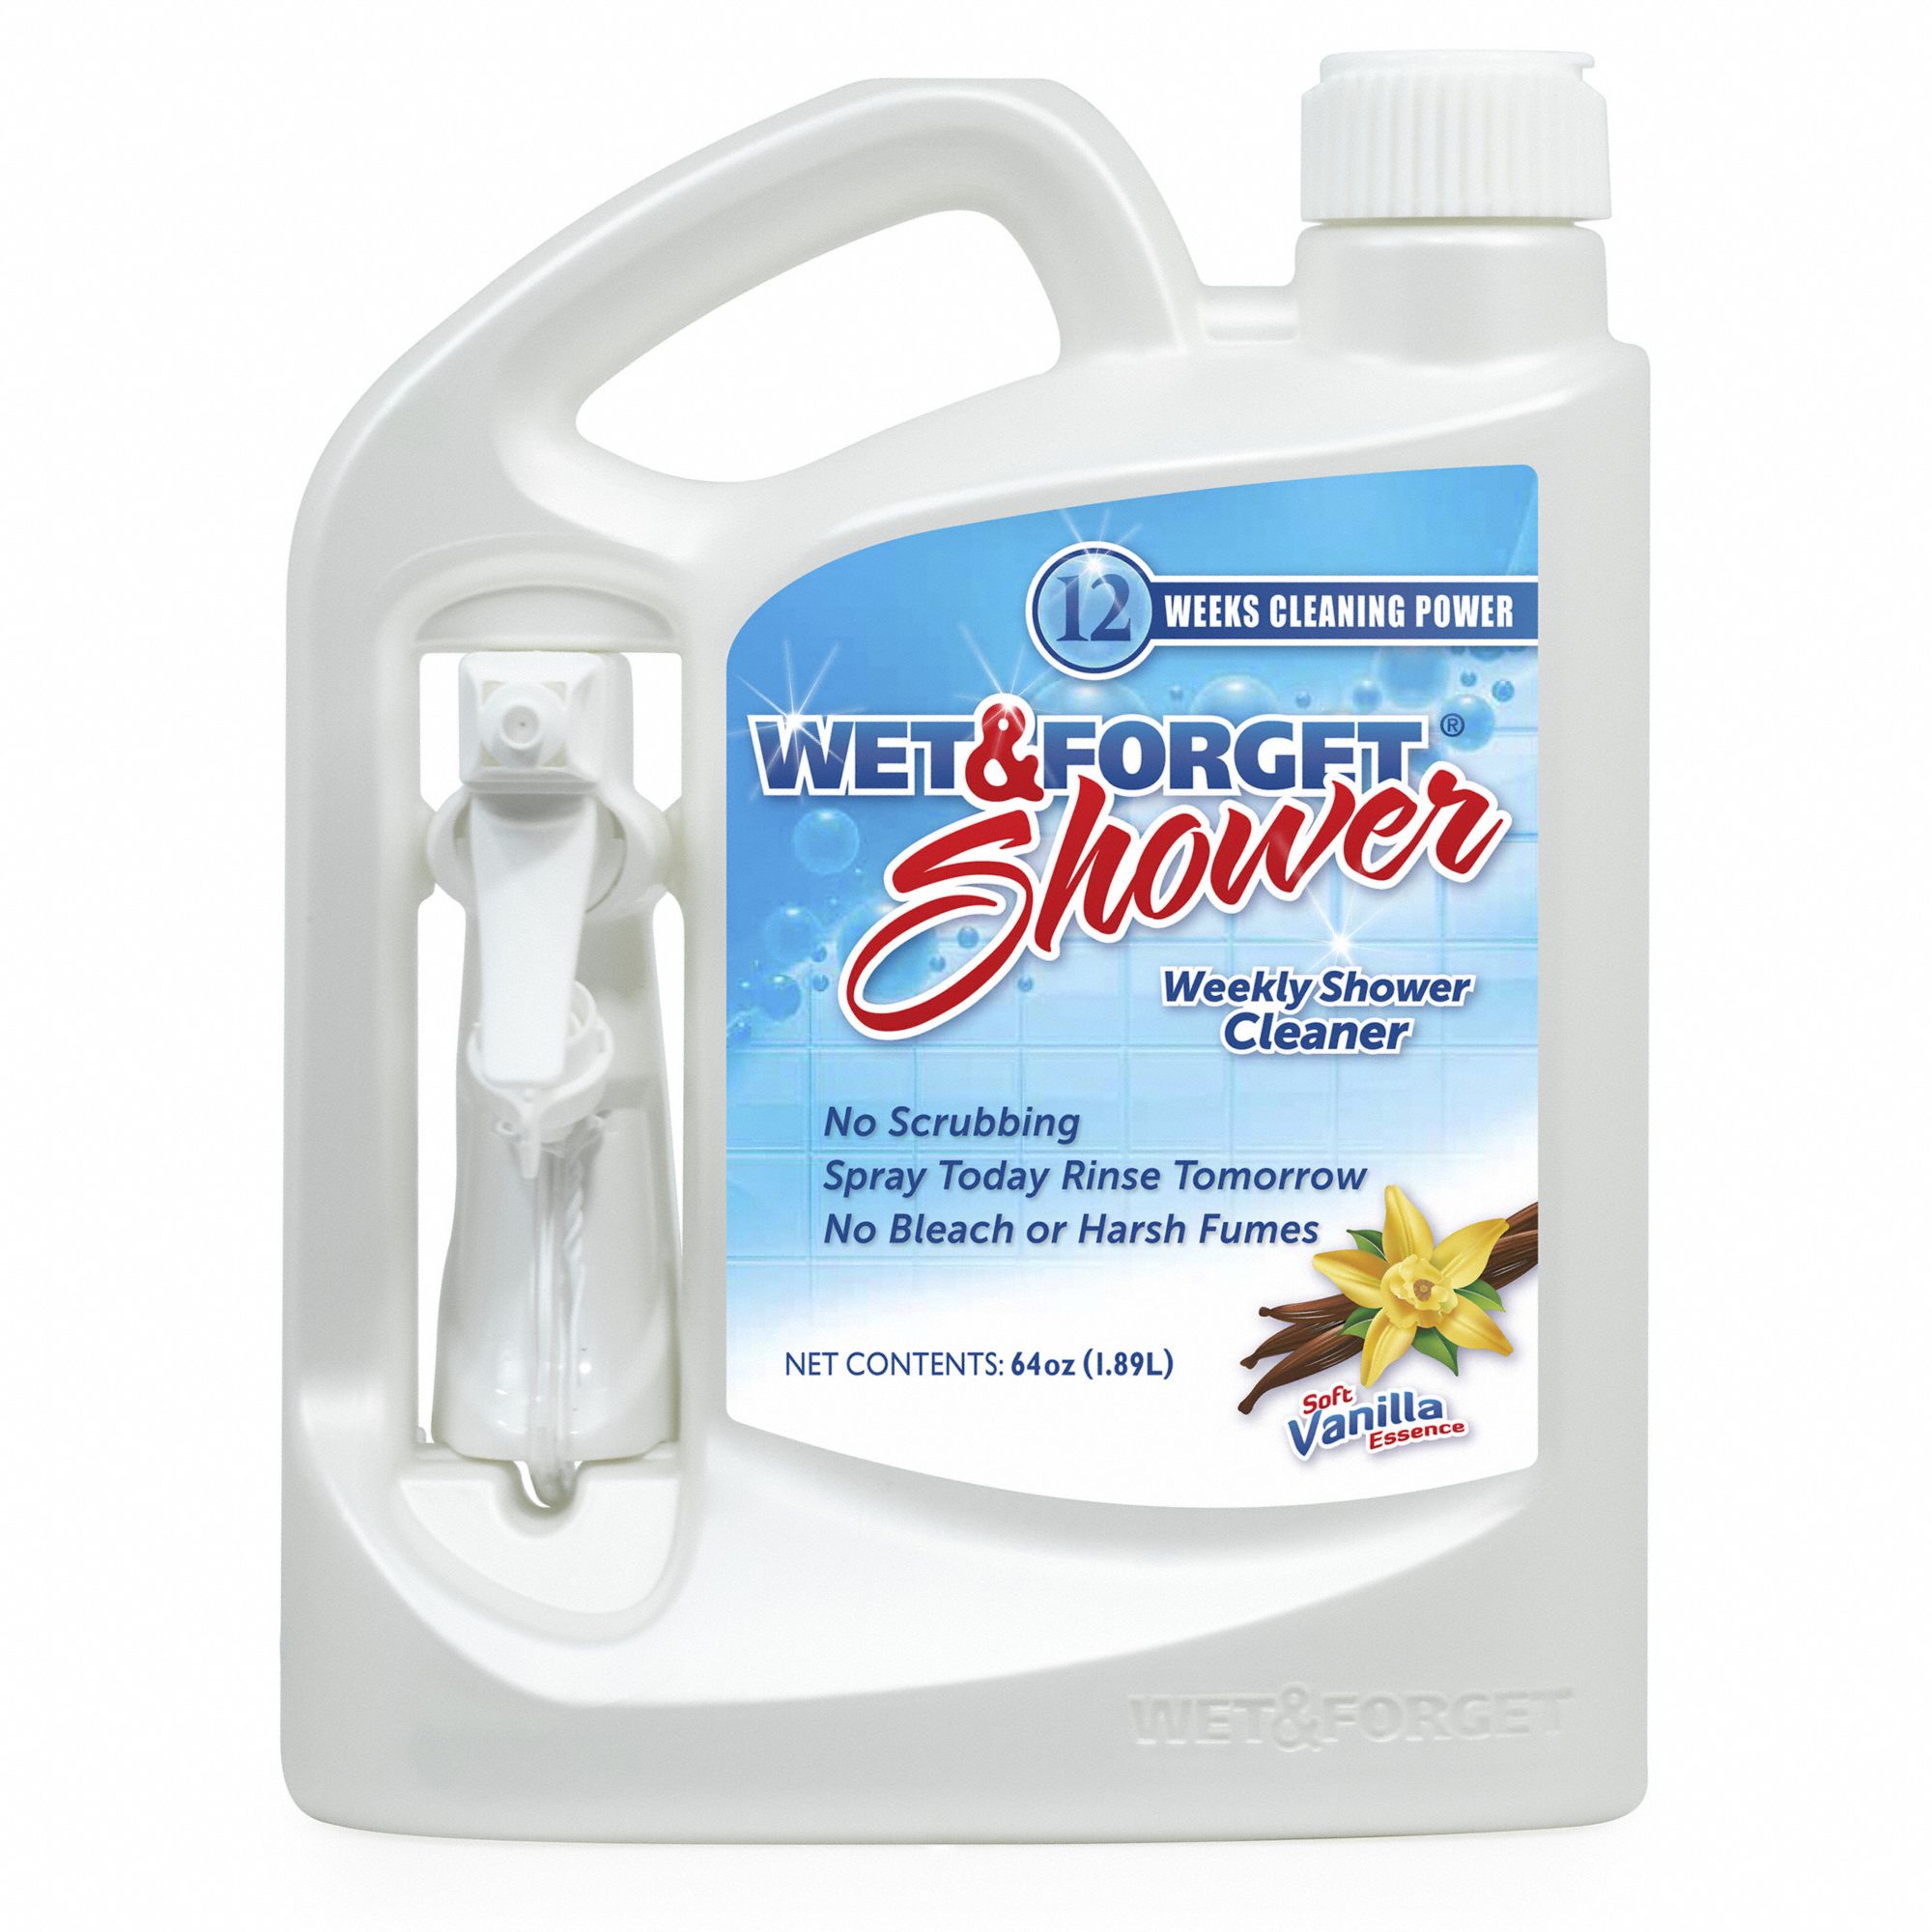 Shower Cleaner: Trigger Spray Bottle, 64 oz Container Size, Ready to Use, Liquid